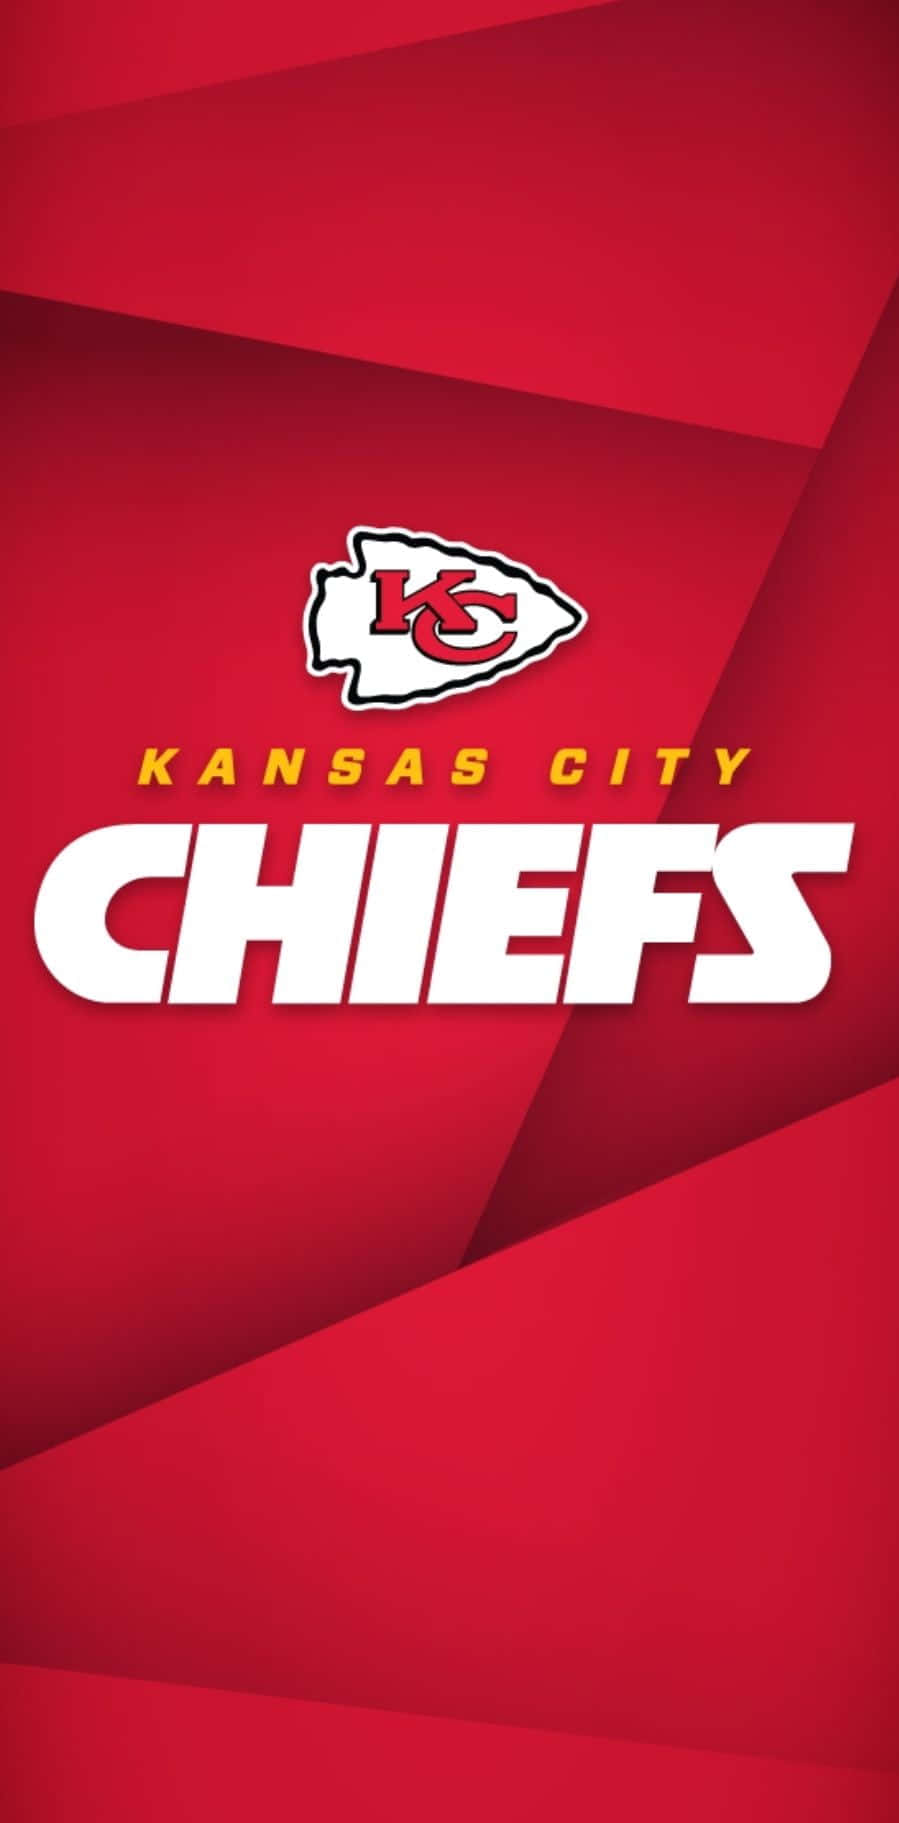 Kansas City Chiefs Logo On A Red Background Wallpaper